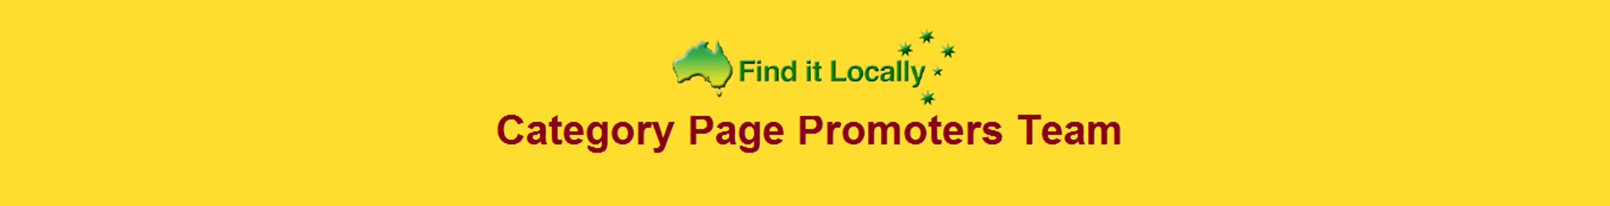 Find It Locally Marketing Category Pages Team